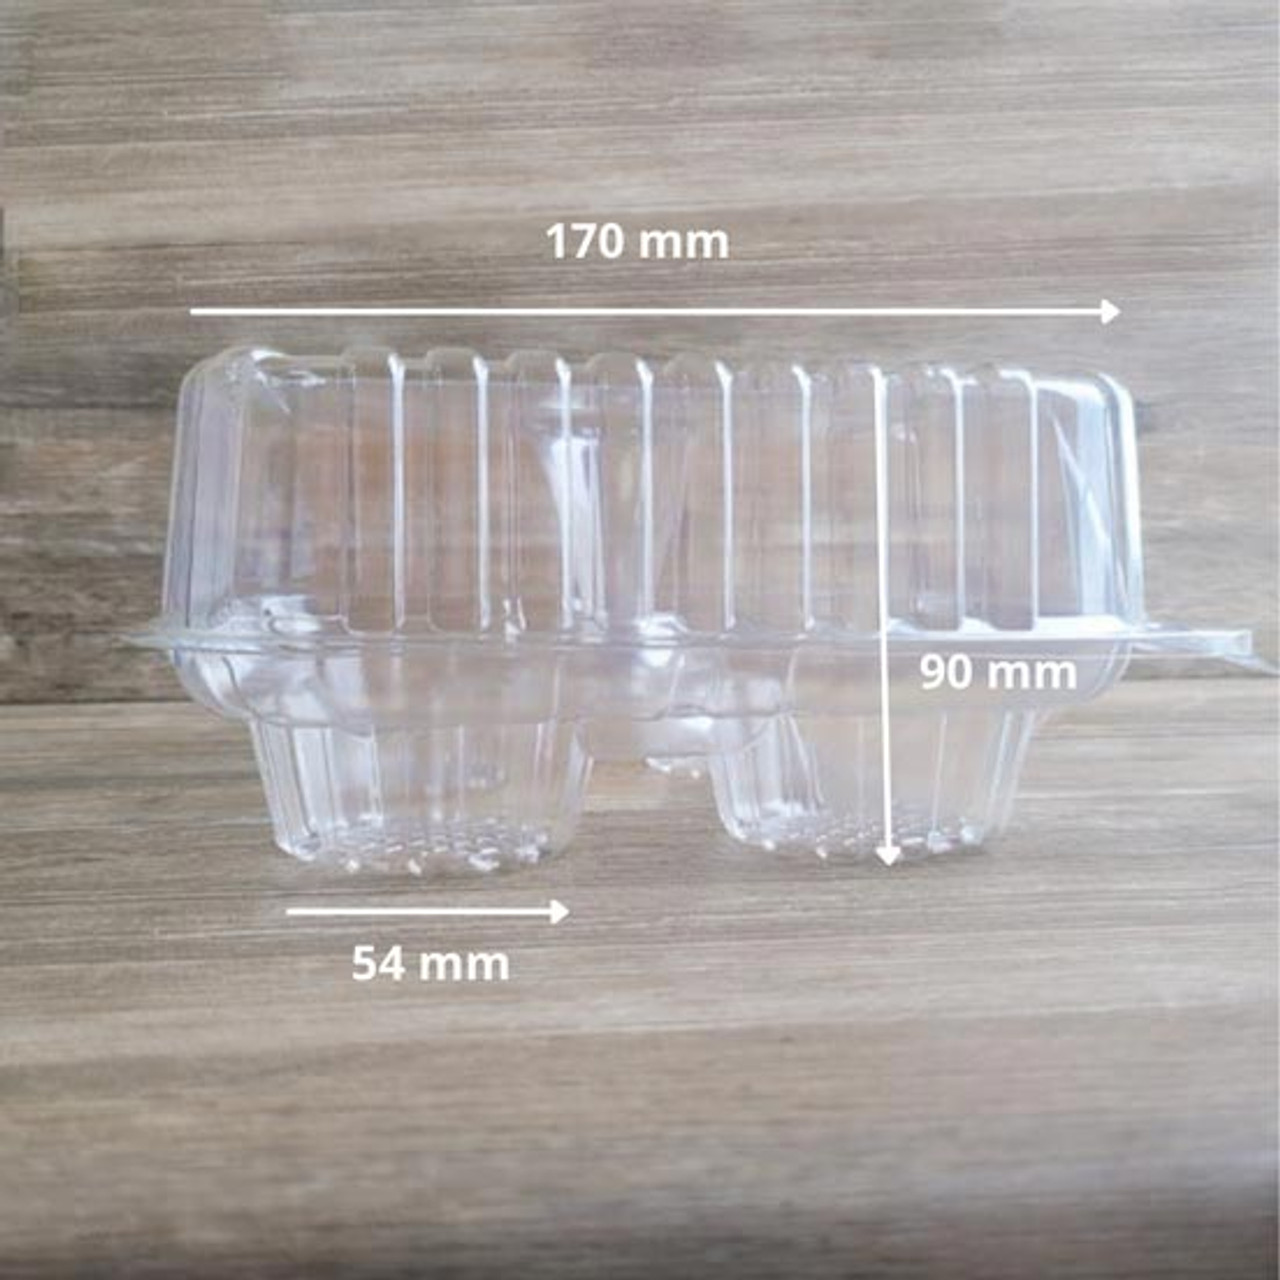 Large Muffin Cupcake Container Plastic with Hinged Lid - Pack of 50